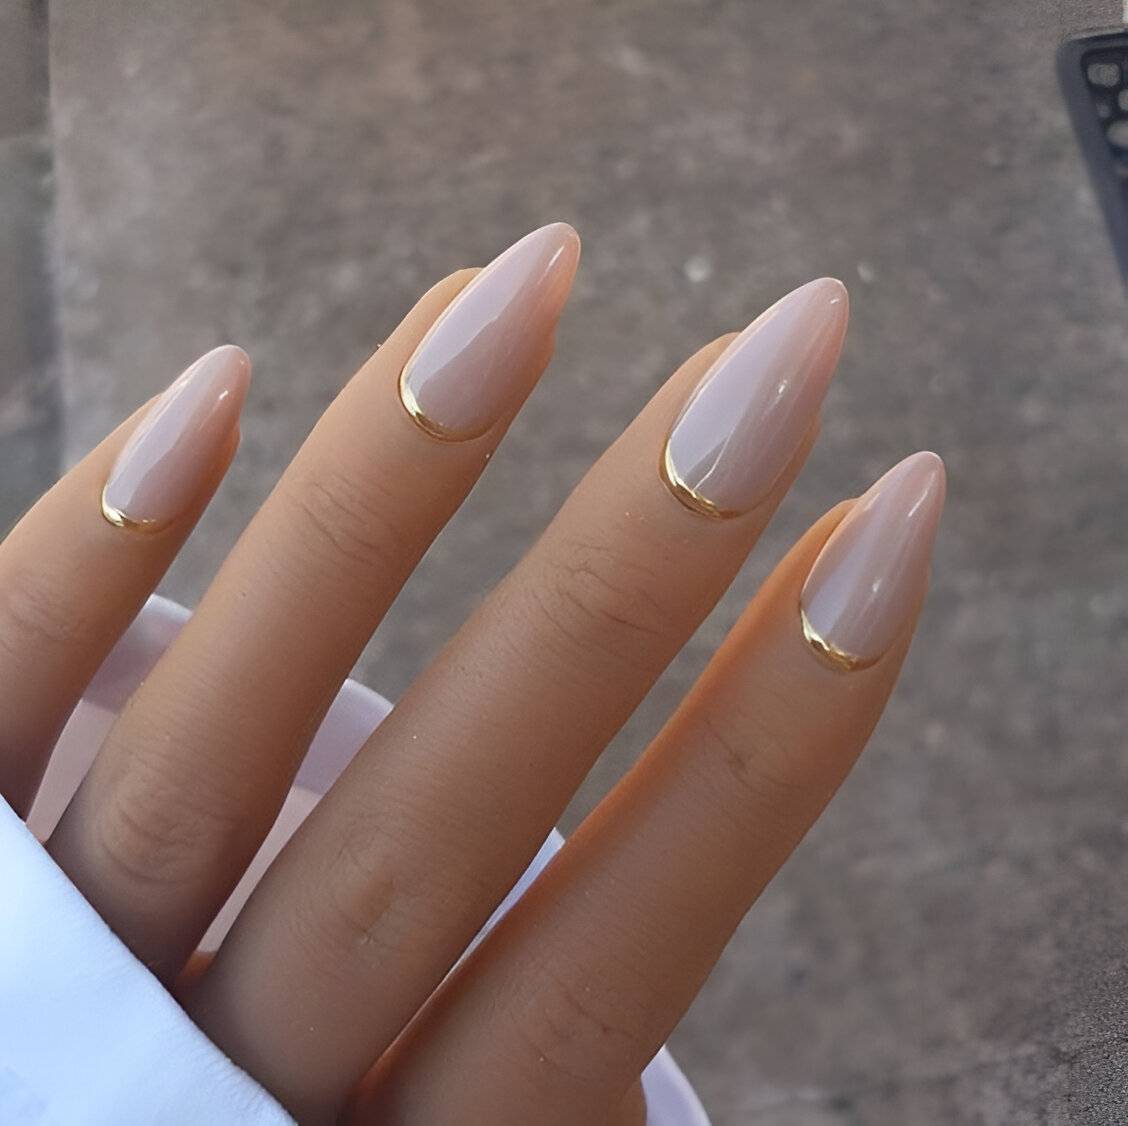 30 Drool-Worthy Short Almond Nail Ideas Every Chic Lady Needs - 221